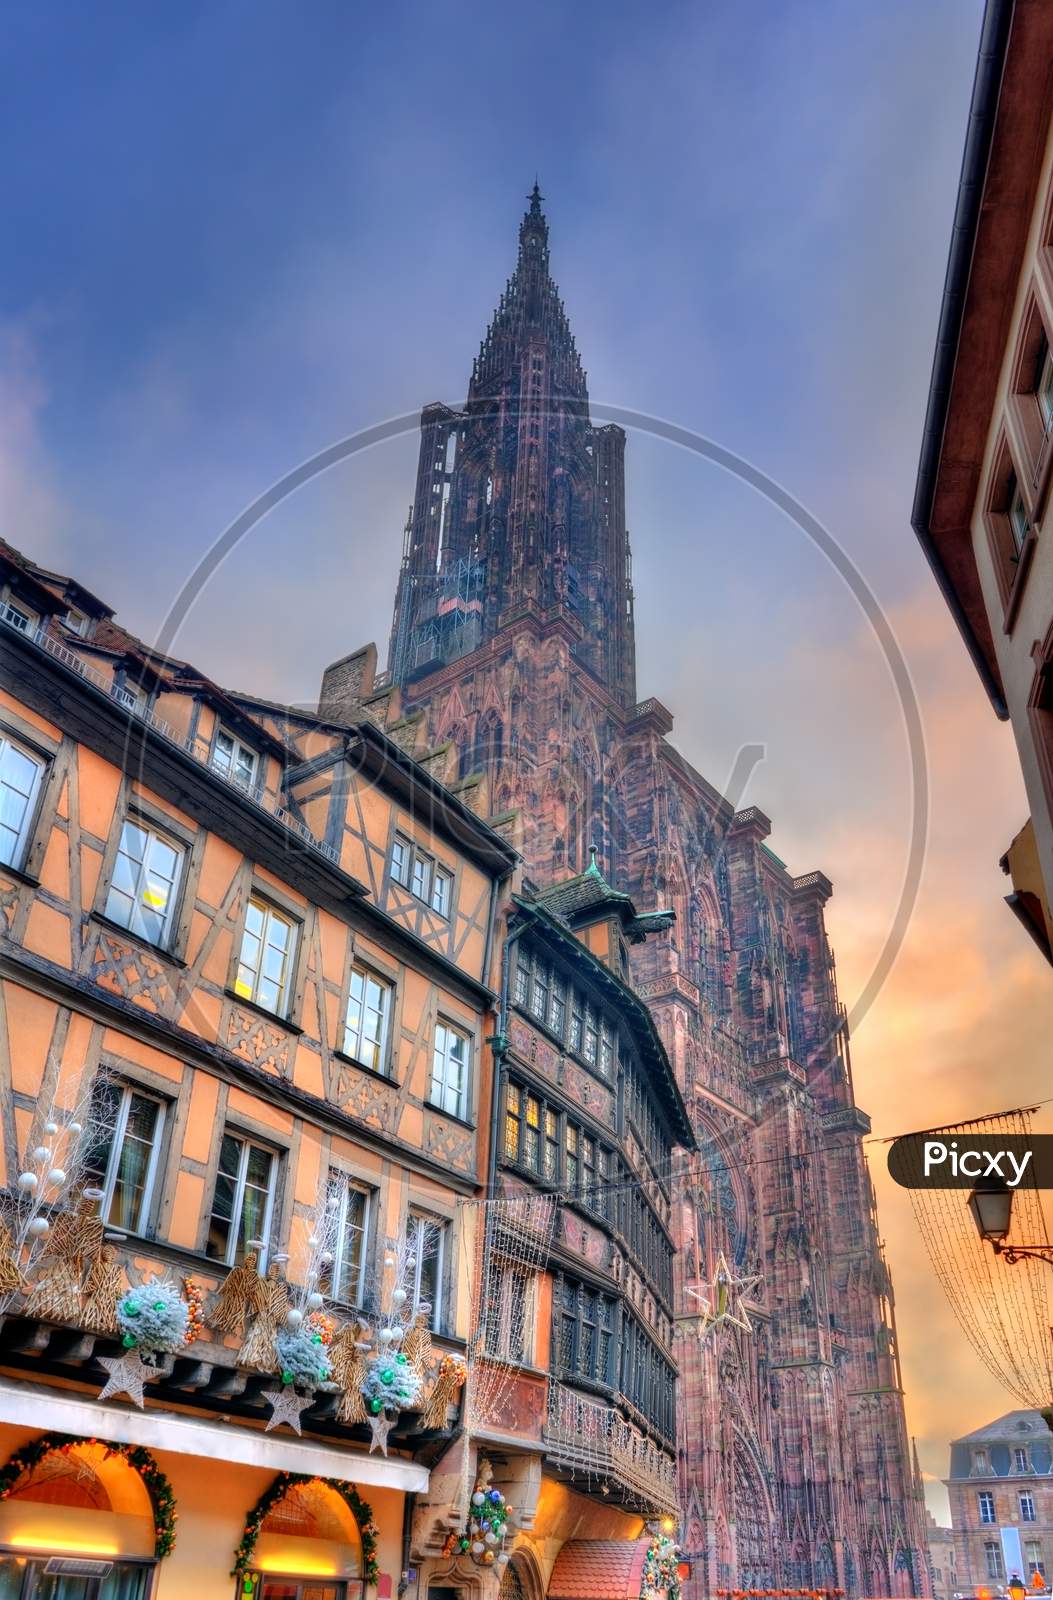 The Notre-Dame Cathedral Of Strasbourg, France